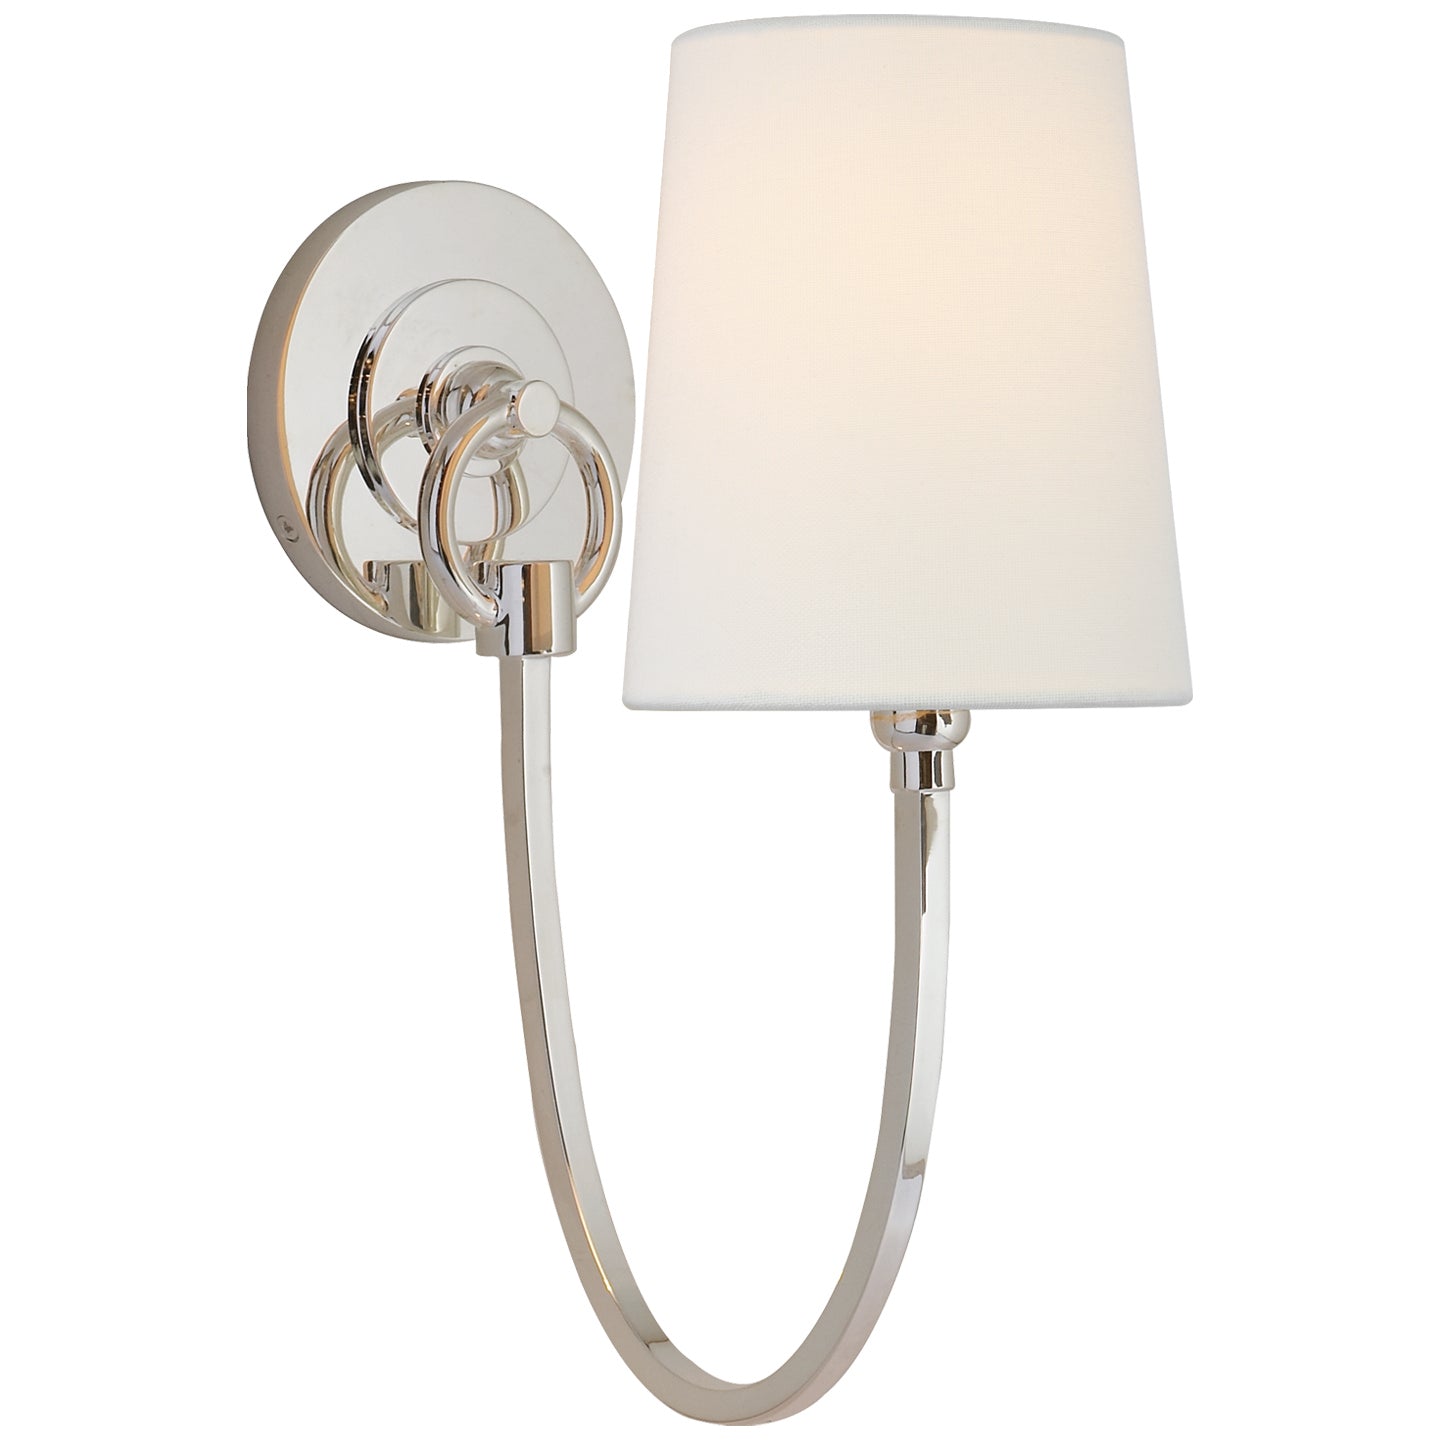 Visual Comfort Signature - TOB 2125PN-L - One Light Wall Sconce - Reed - Polished Nickel